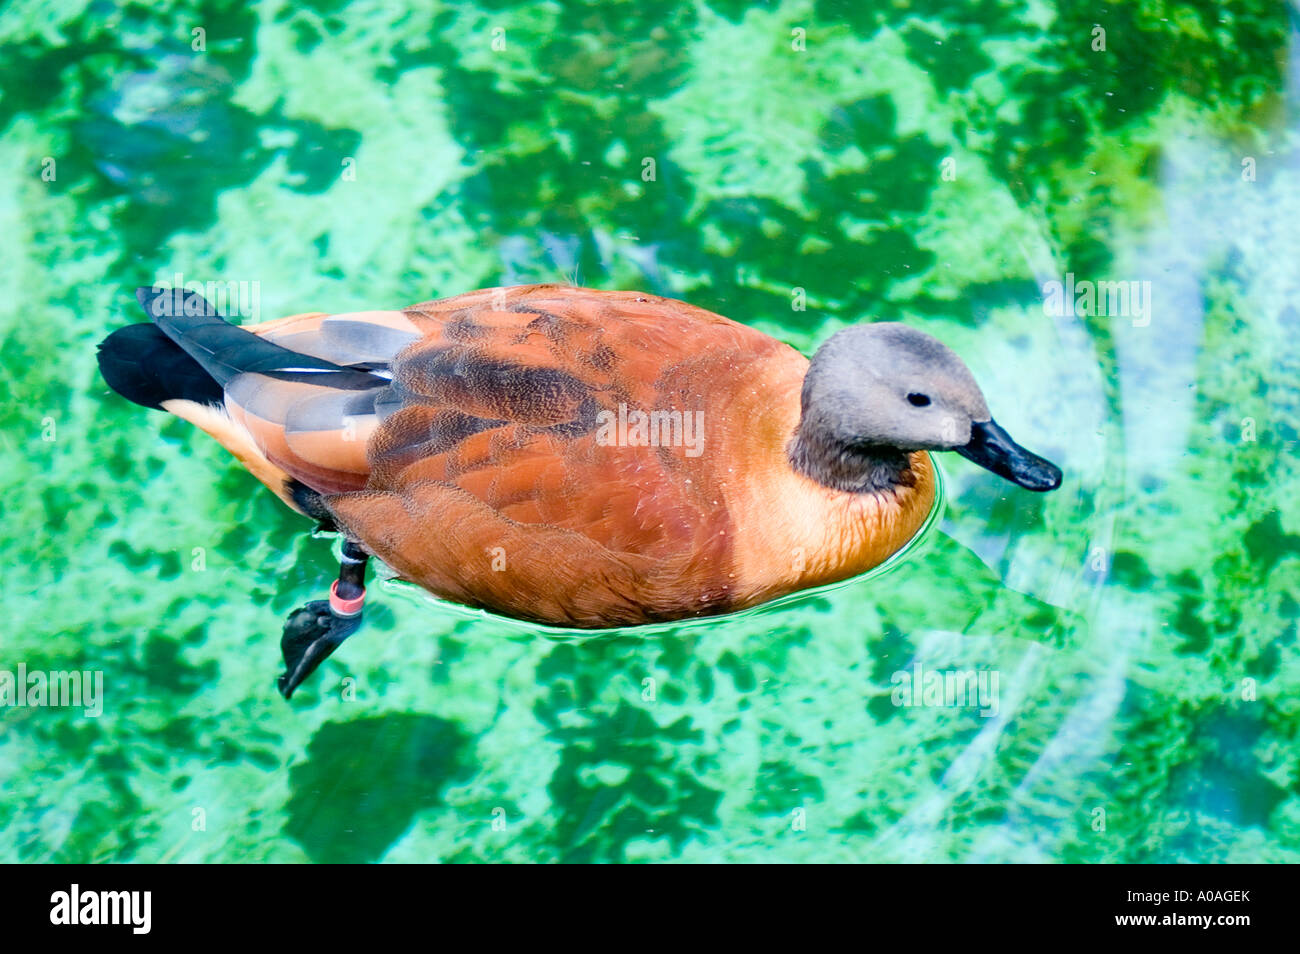 Brown grey duck swimming inside azure water pond Shoot from above Stock Photo